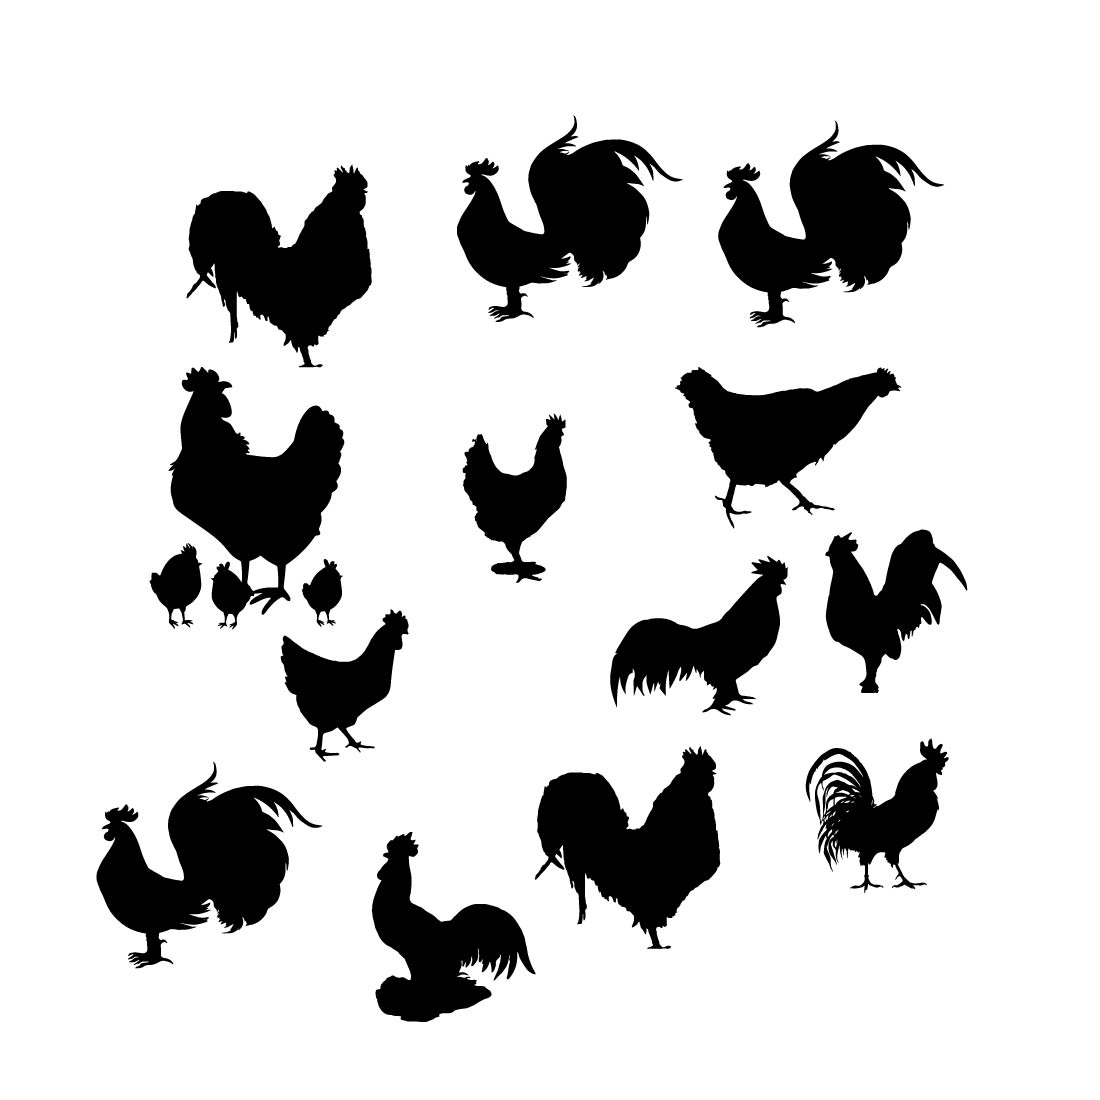 Chicken silhouette set cover image.